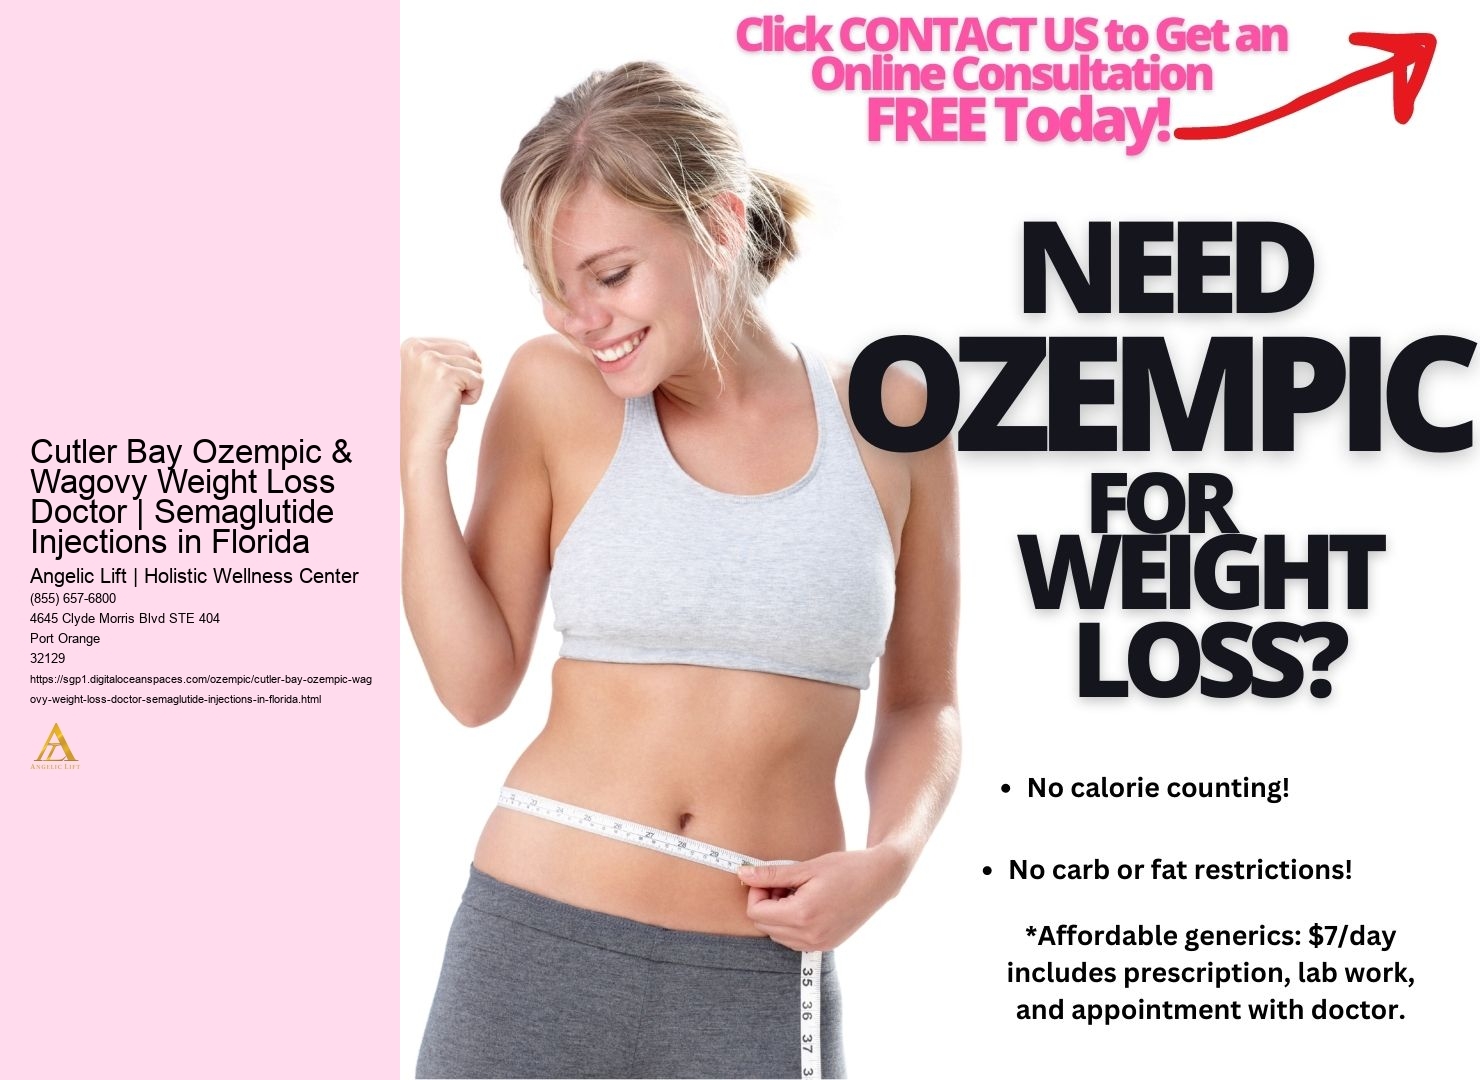 Cutler Bay Ozempic & Wagovy Weight Loss Doctor | Semaglutide Injections in Florida